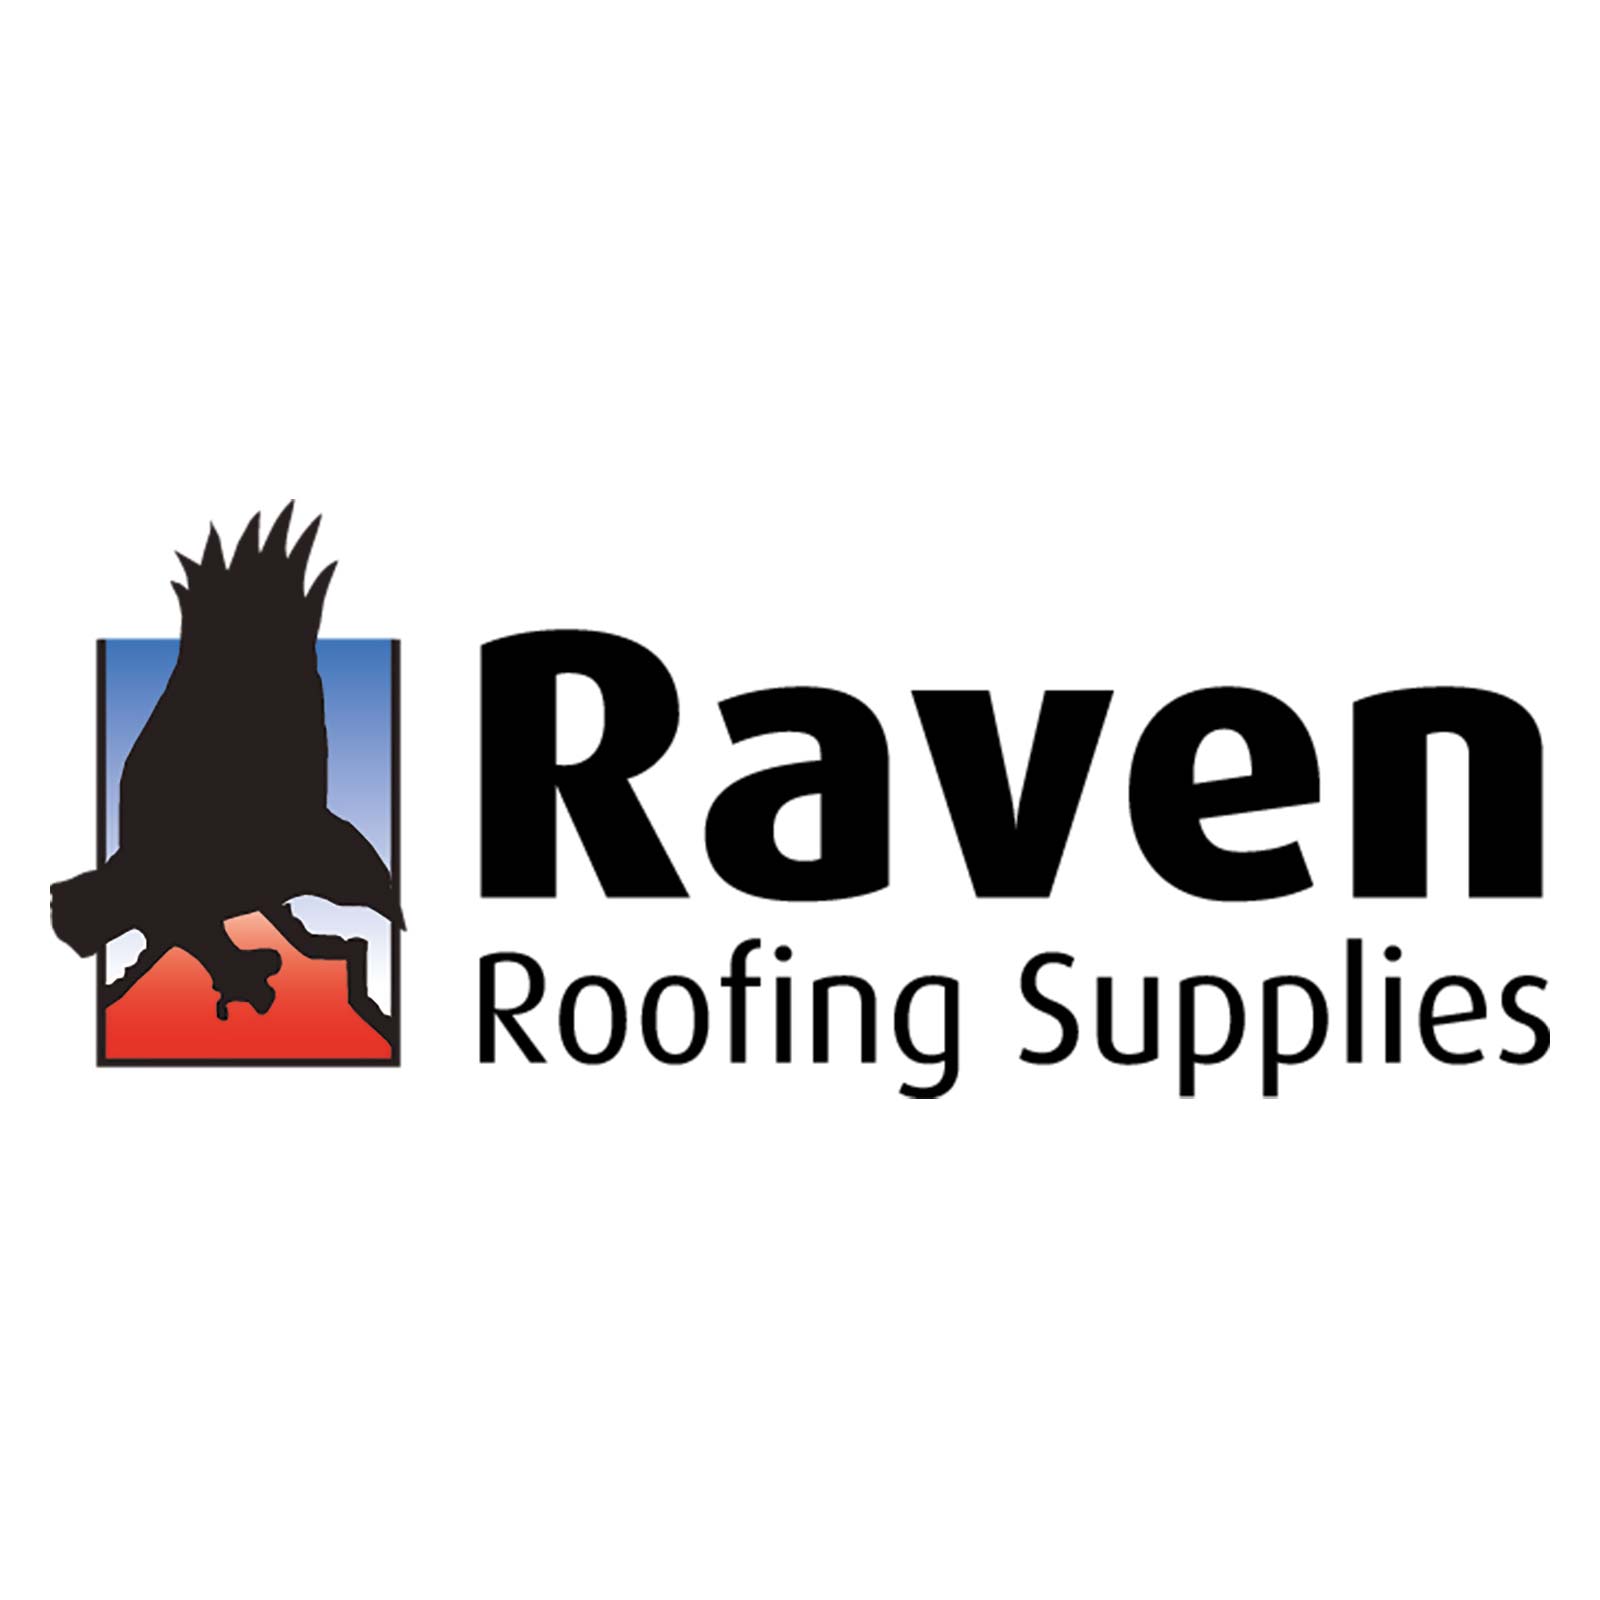 Raven Roofing Supplies